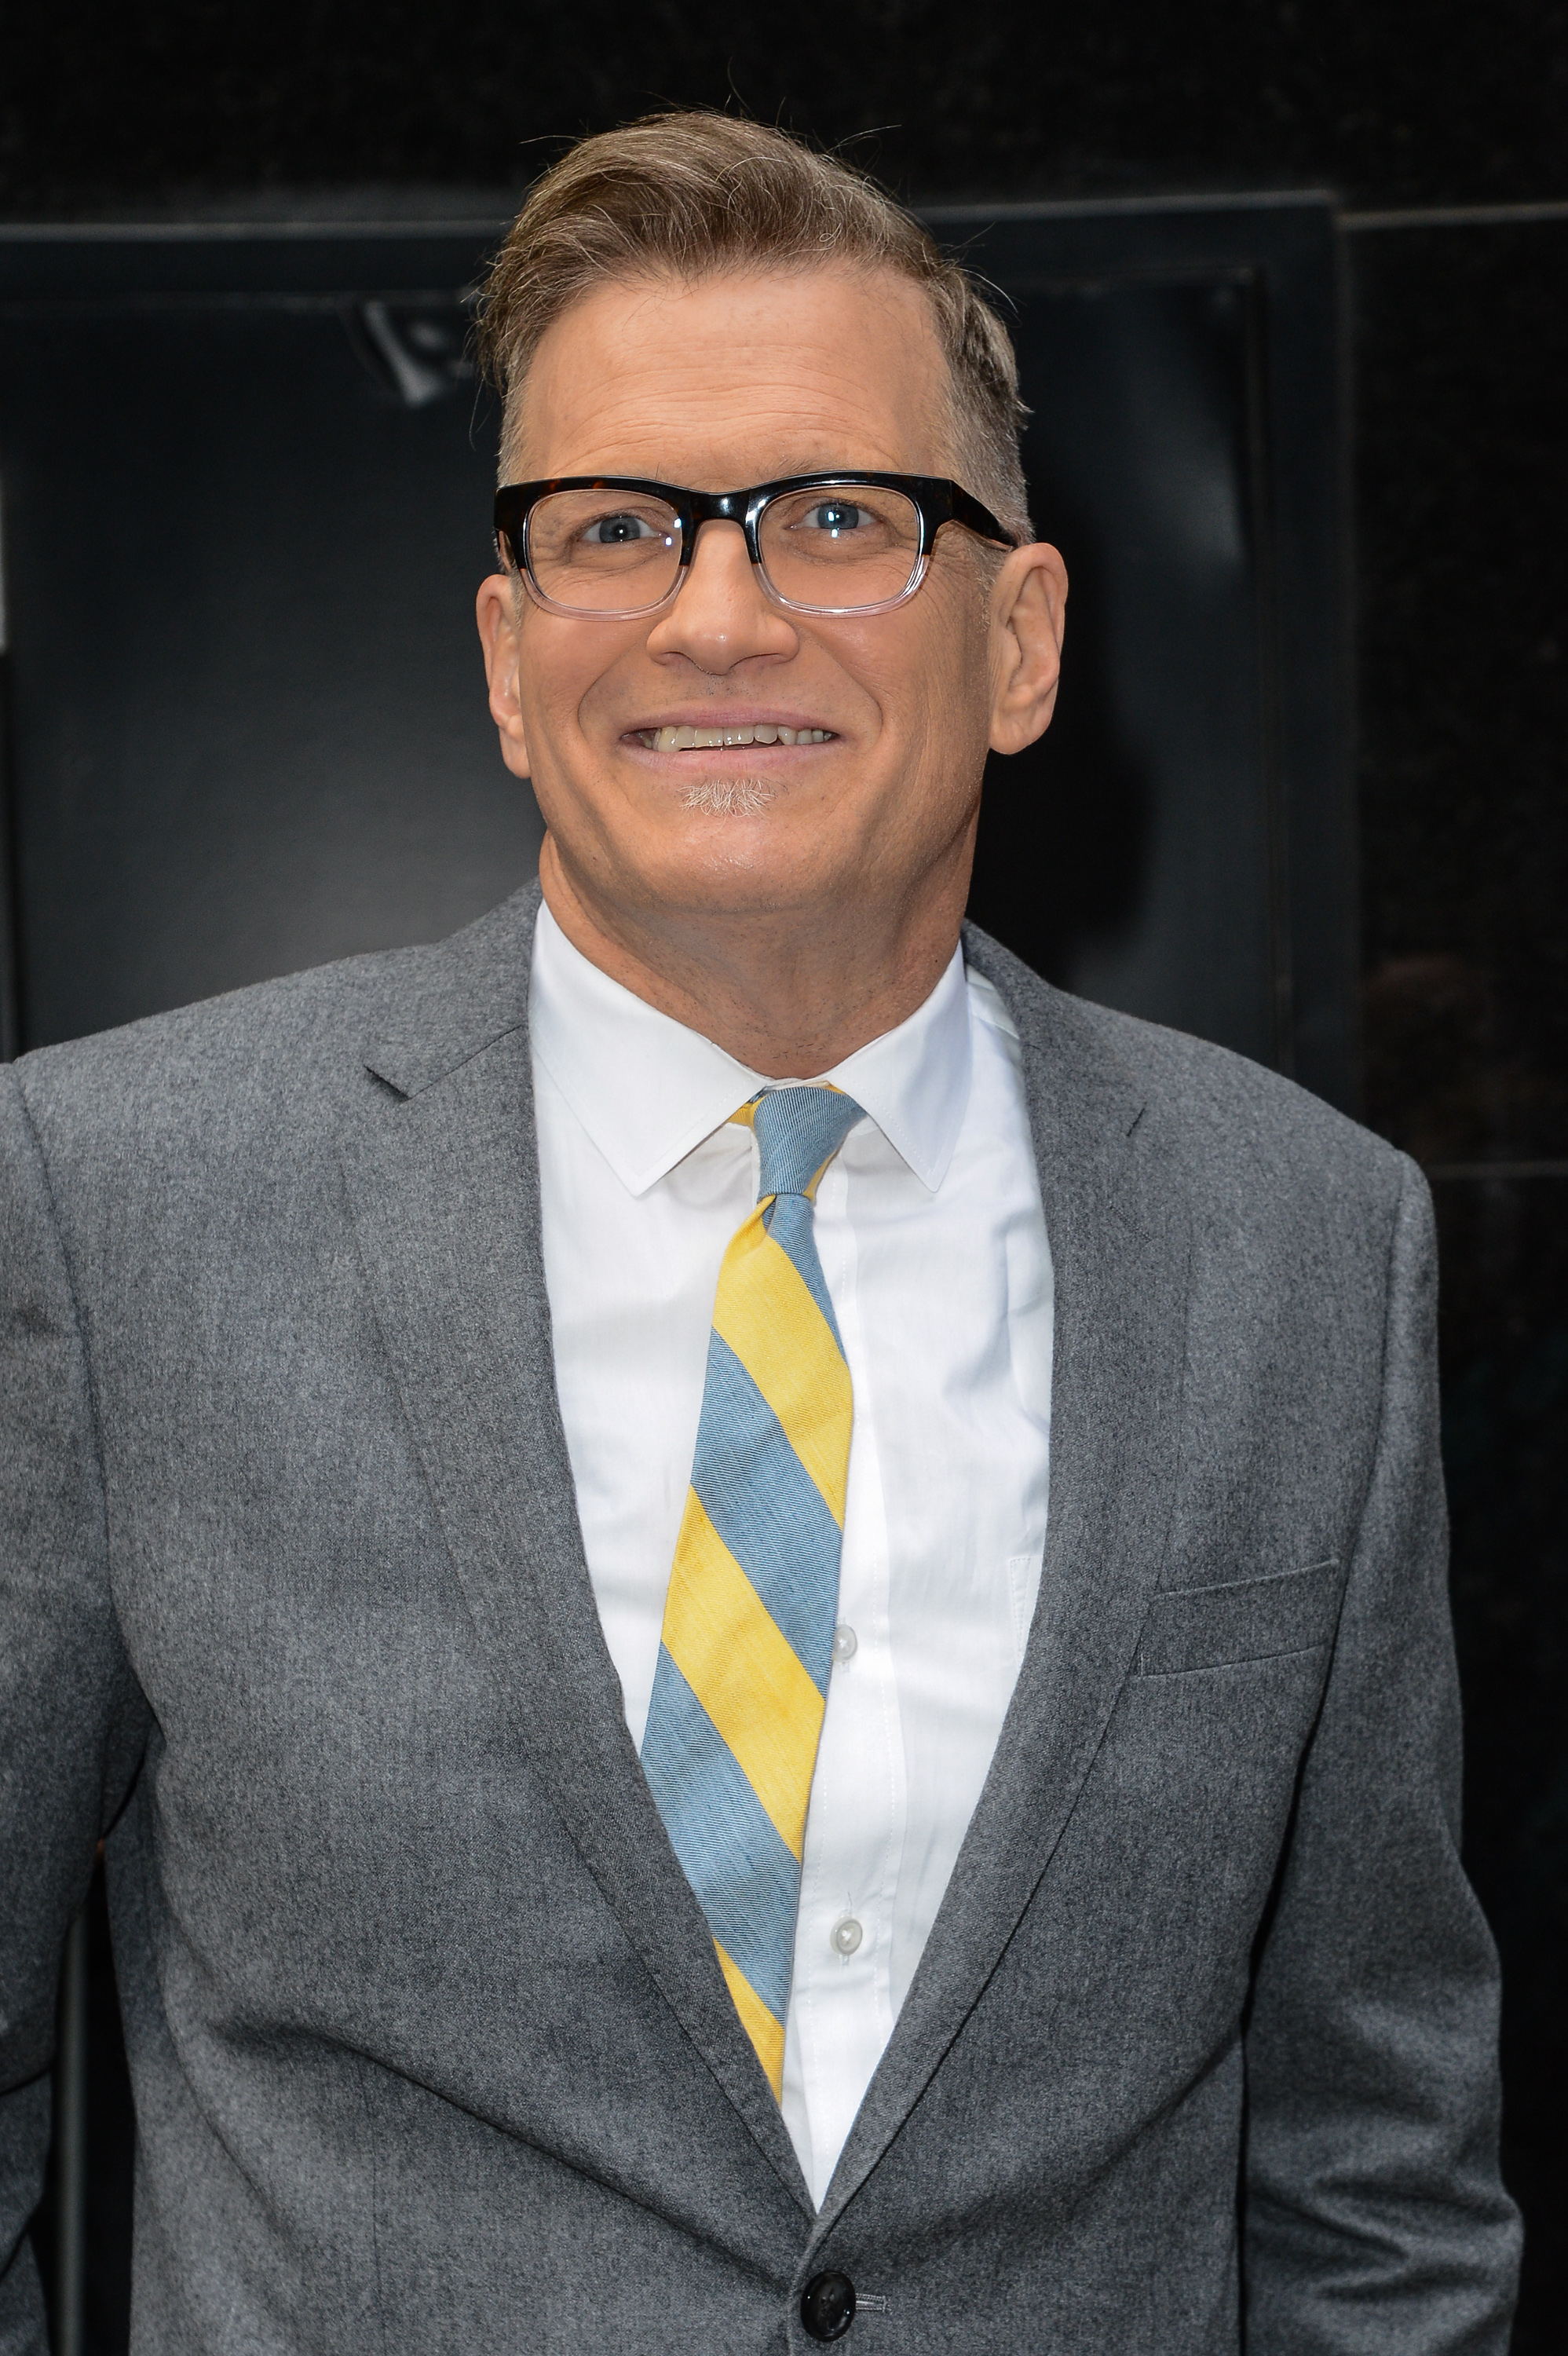 Actor Drew Carey leaves the "Good Morning America" taping at the ABC Times Square Studios on April 22, 2014 in New York City. (Ray Tamarra&mdash;GC Images)